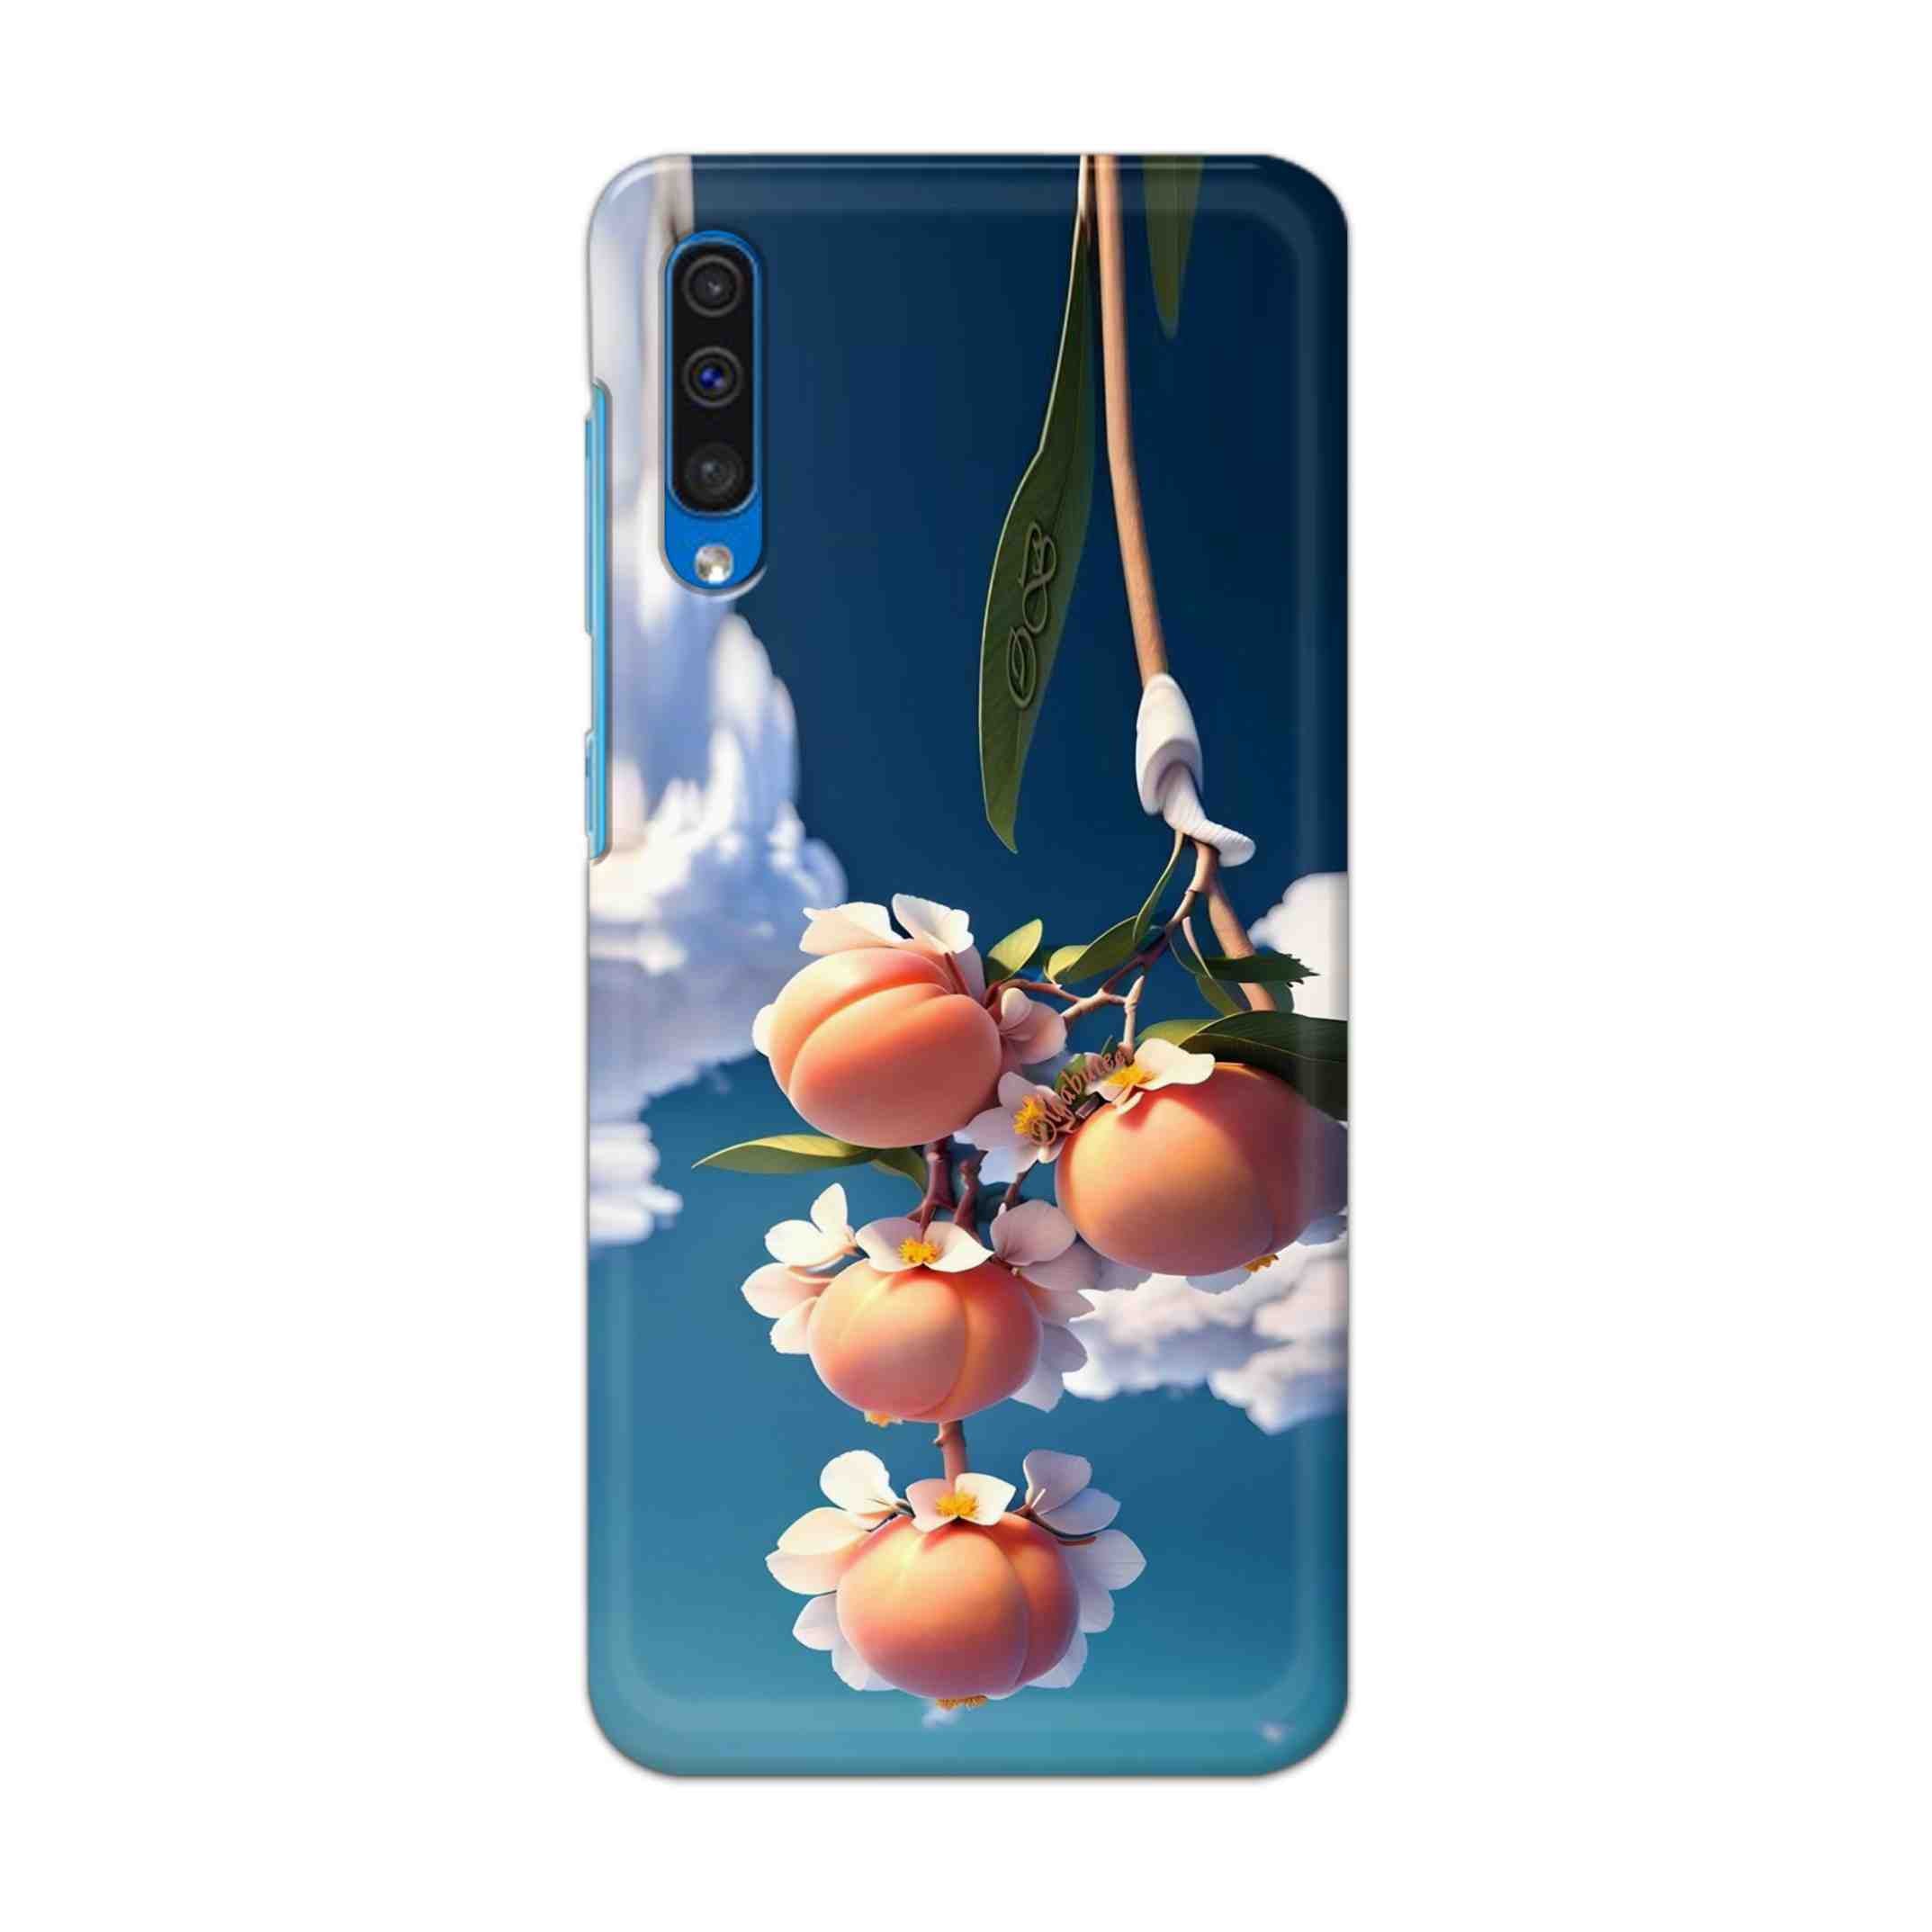 Buy Fruit Hard Back Mobile Phone Case Cover For Samsung Galaxy A50 / A50s / A30s Online